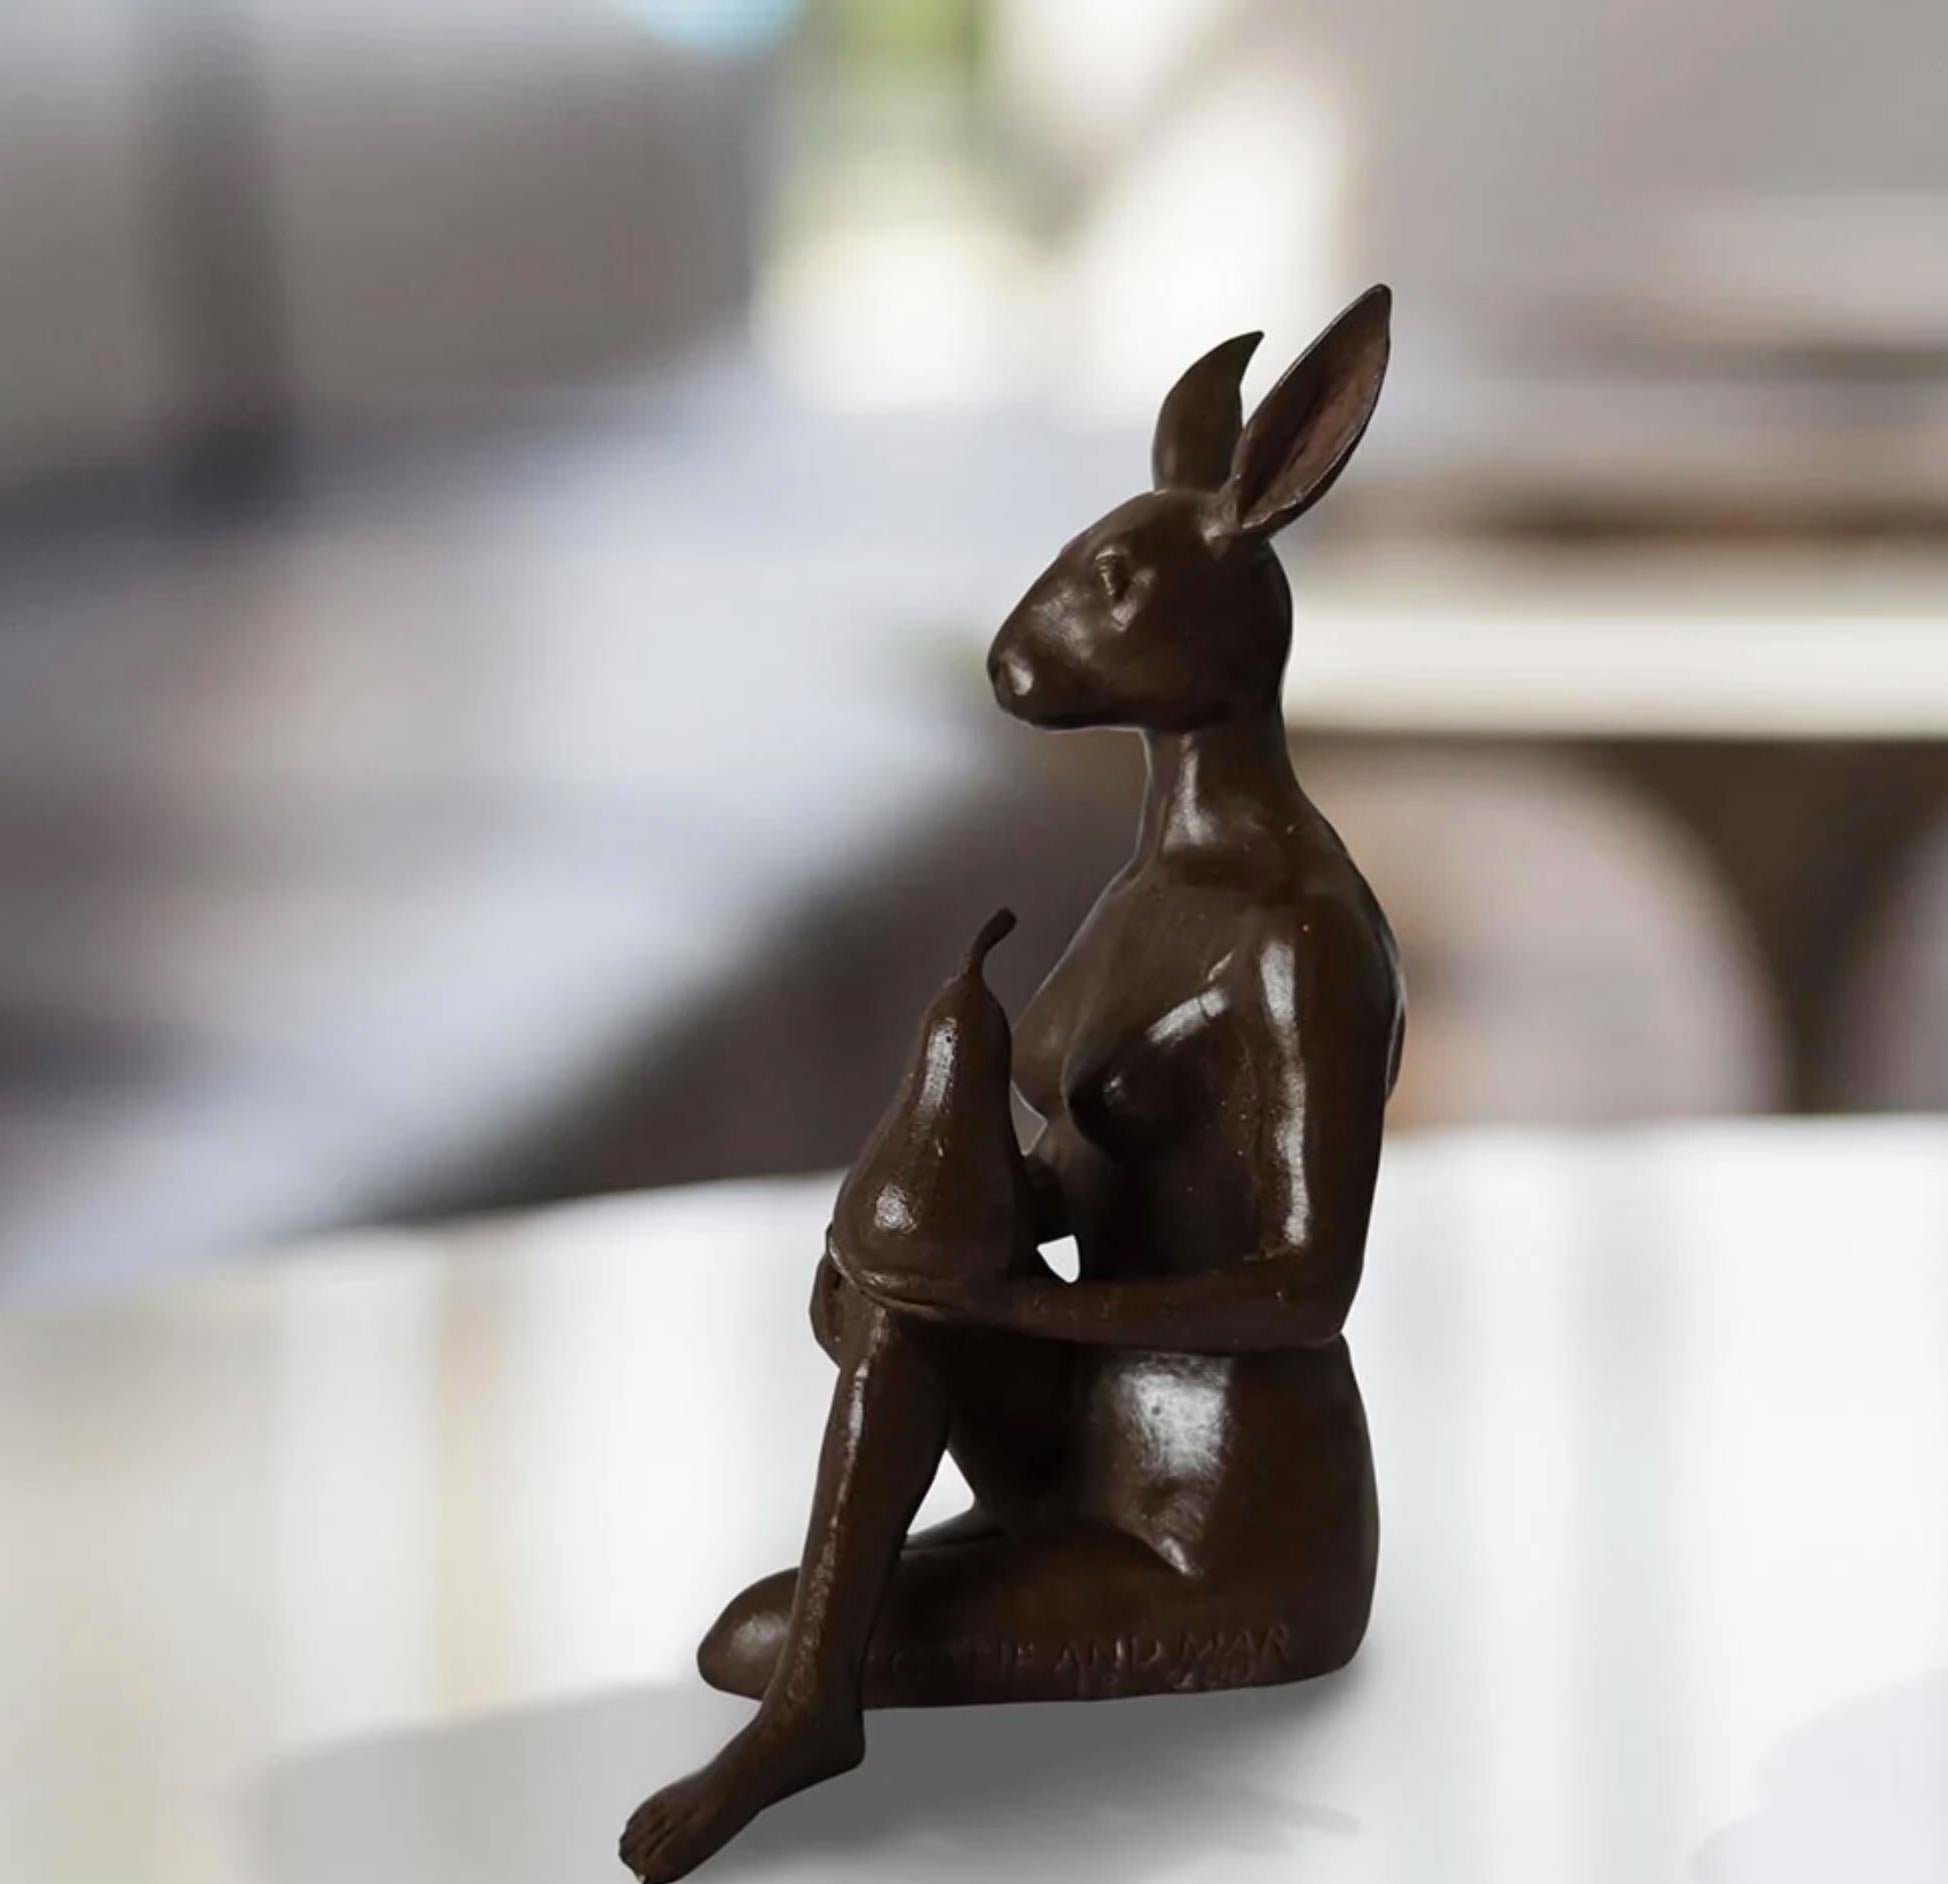 Authentic Bronze The Pearfect Rabbit Sculpture by Gillie and Marc - Contemporary Art by Gillie and Marc Schattner